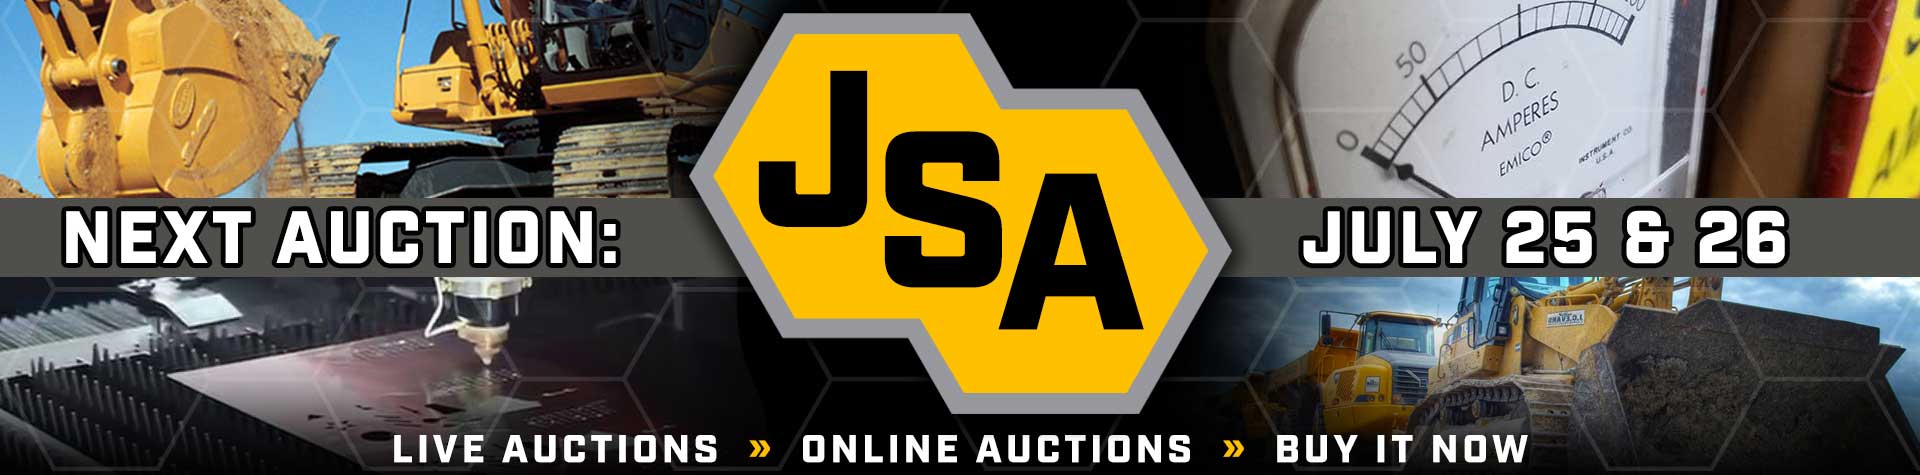 Various heavy equipment including excavators, backhoes, and cranes available for auction at J. Stout Auctions.